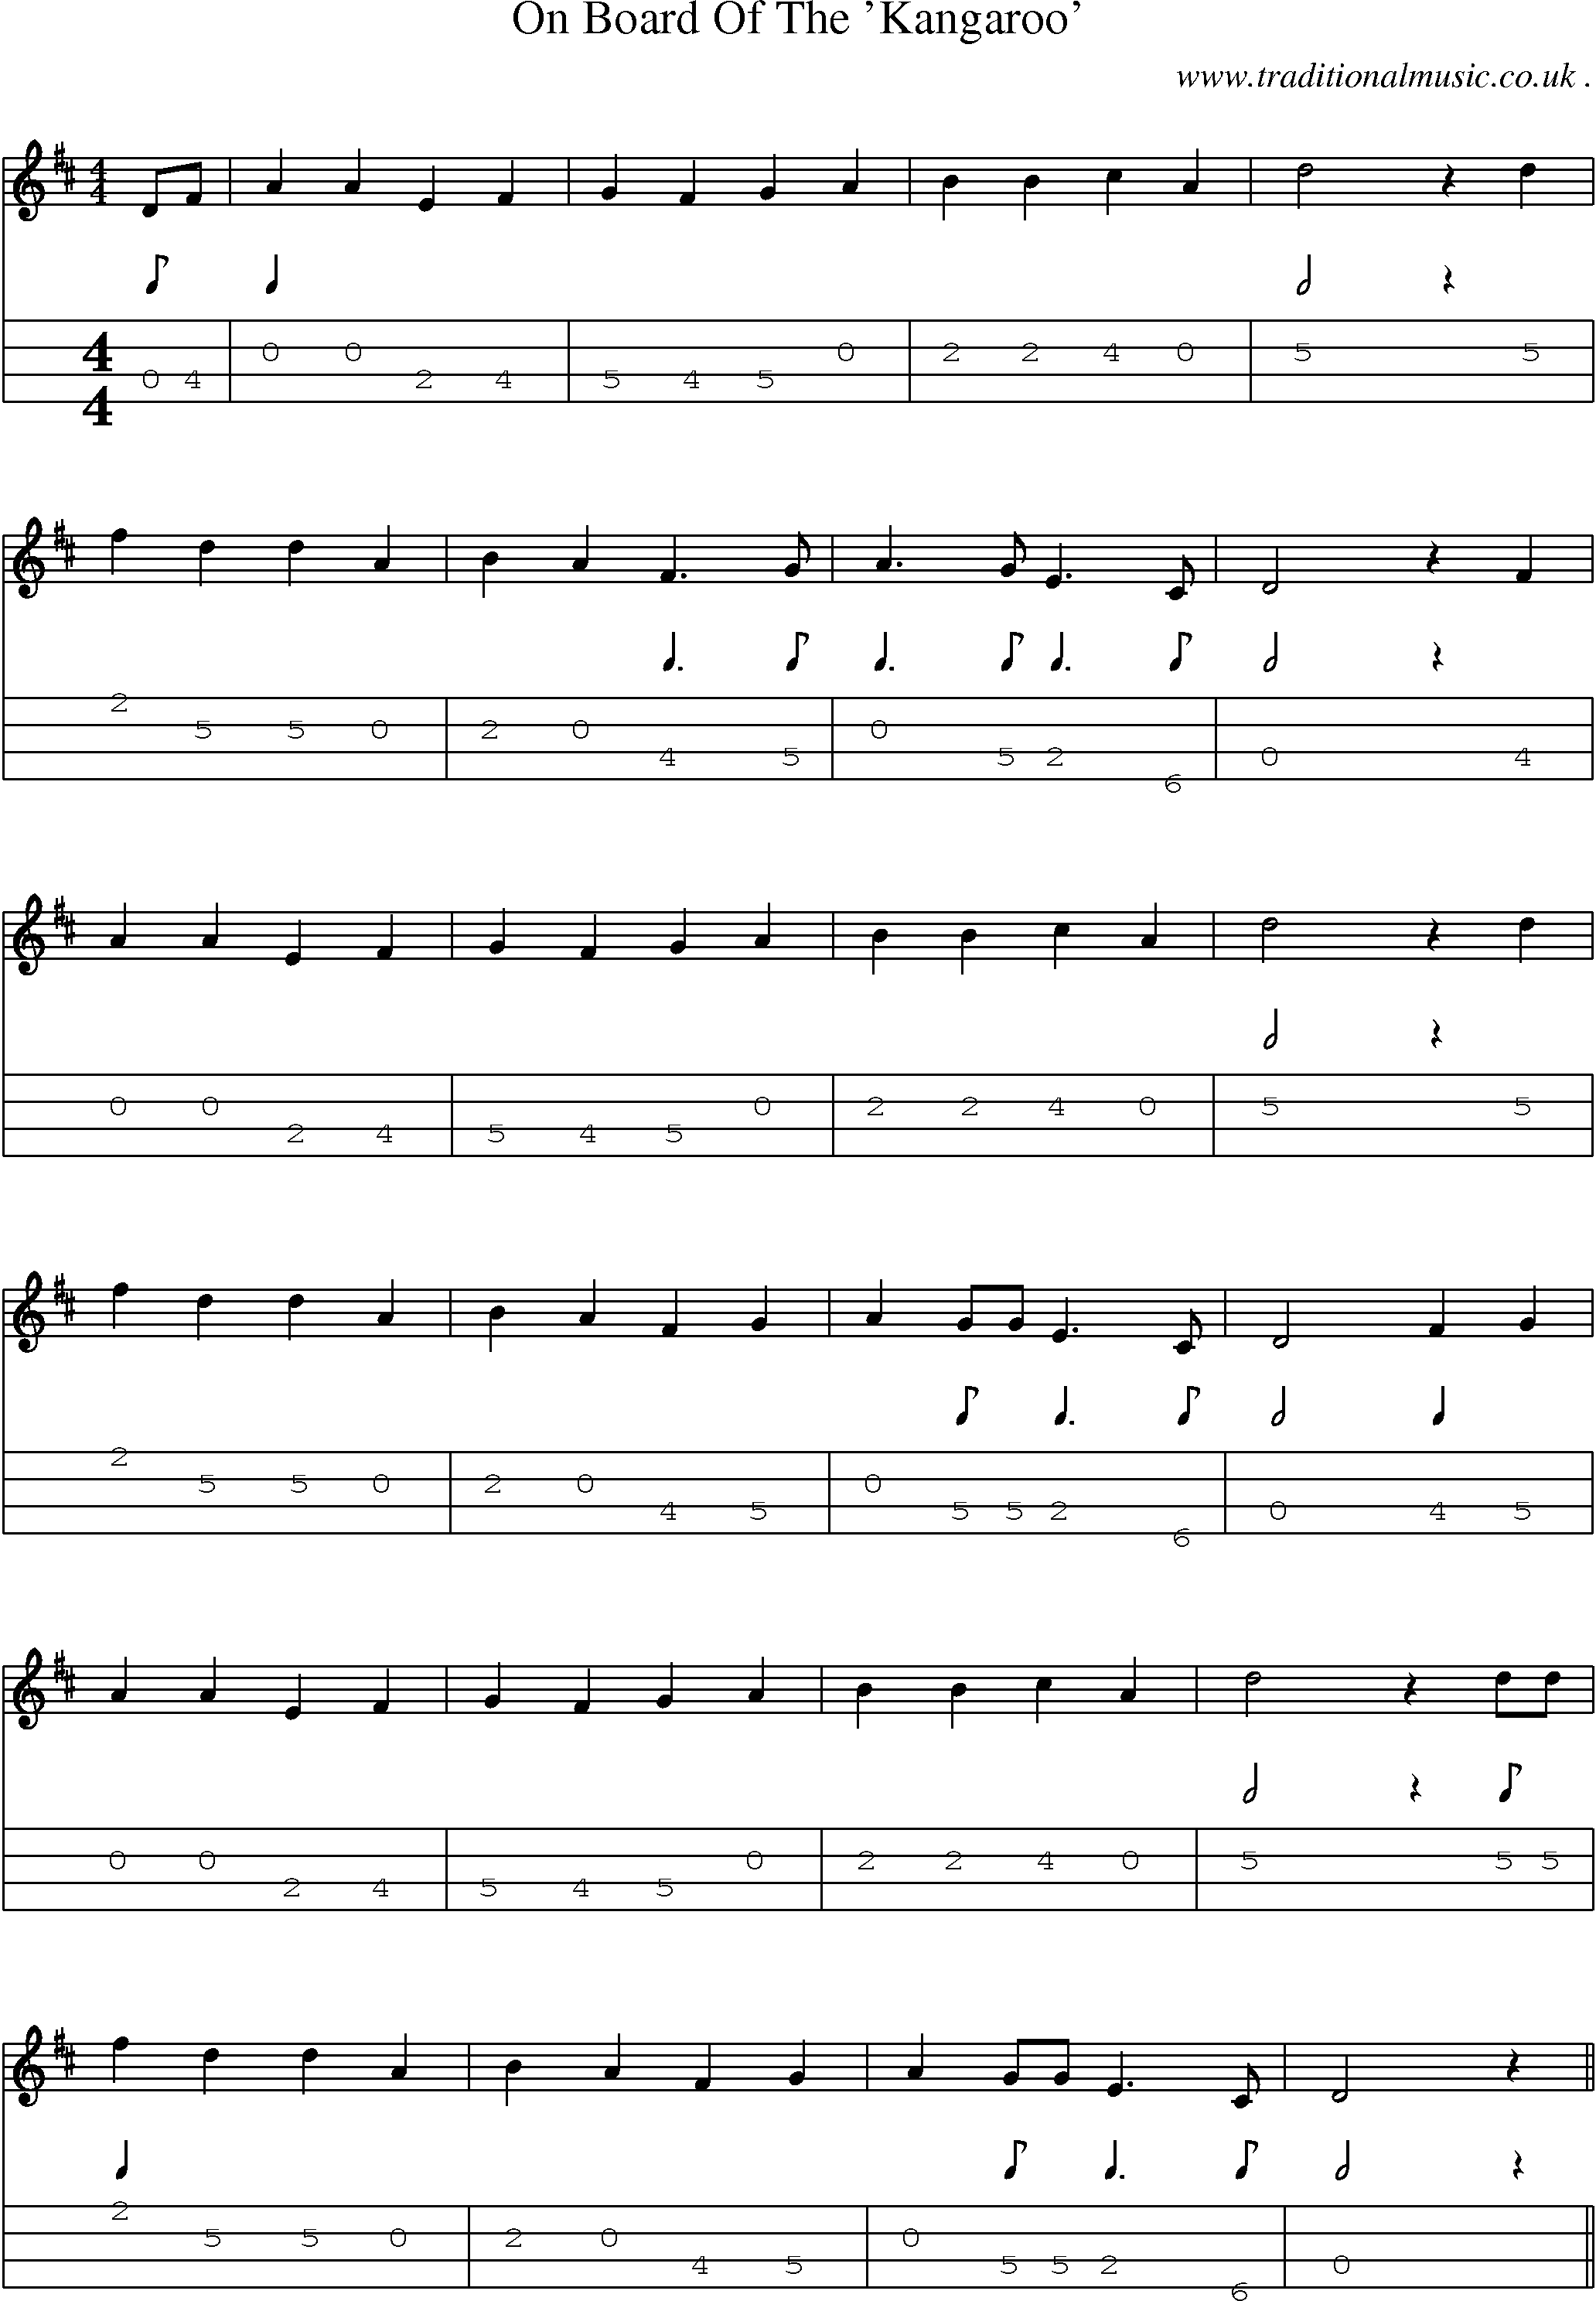 Sheet-Music and Mandolin Tabs for On Board Of The Kangaroo